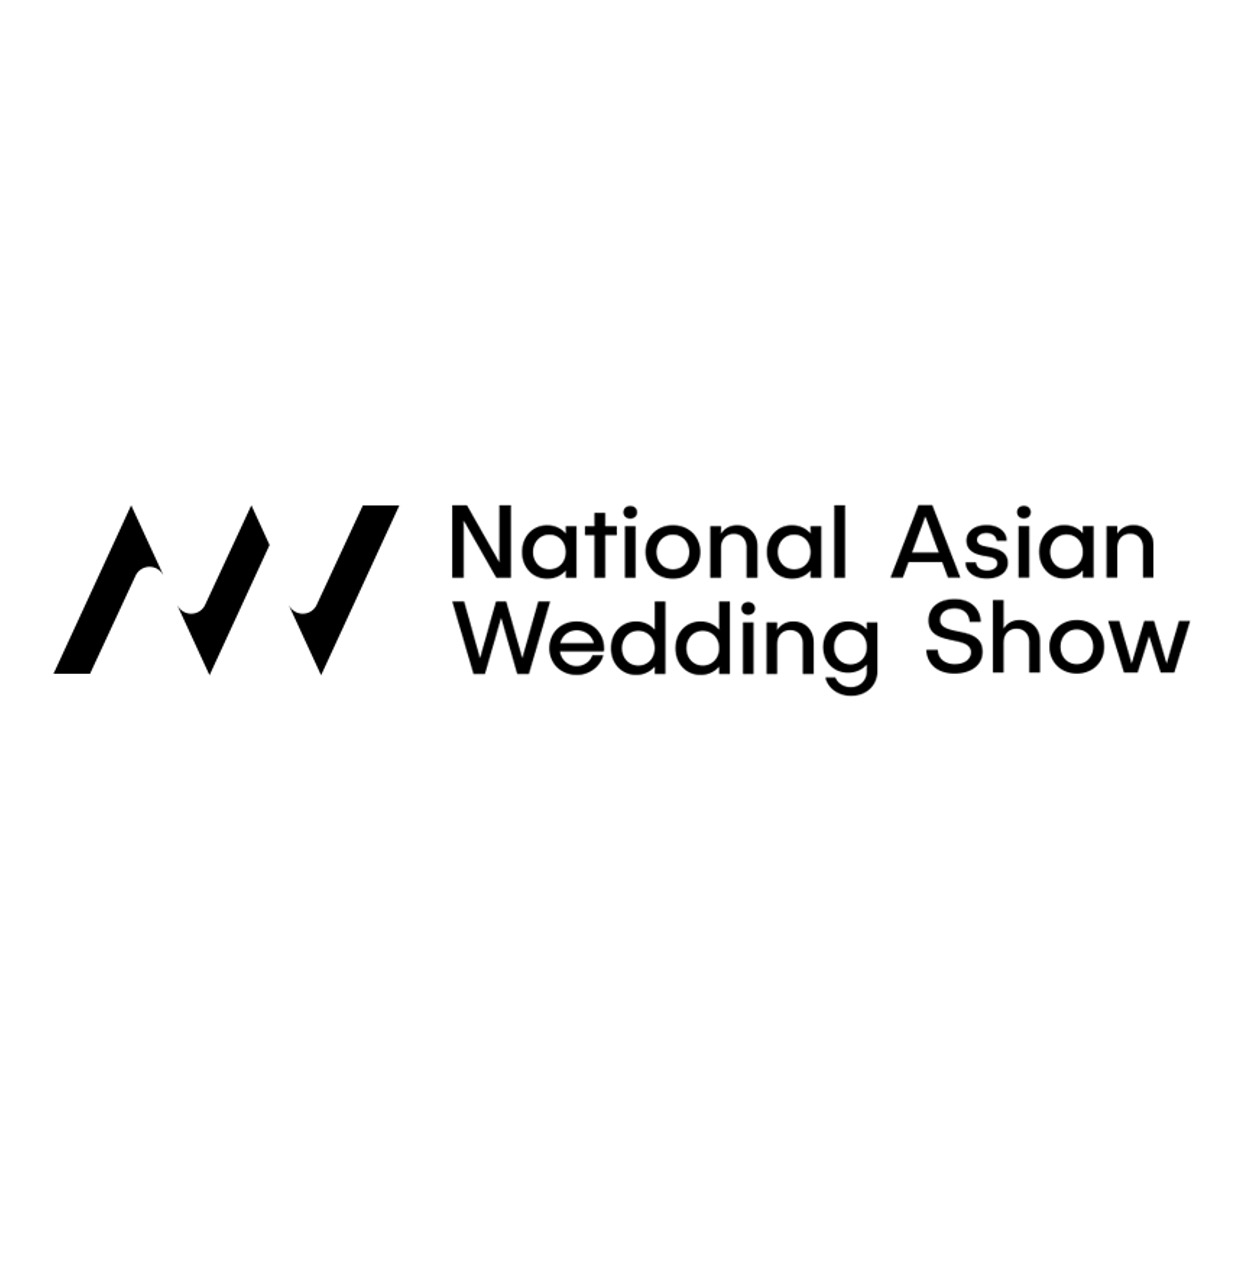 The National Asian Wedding Show